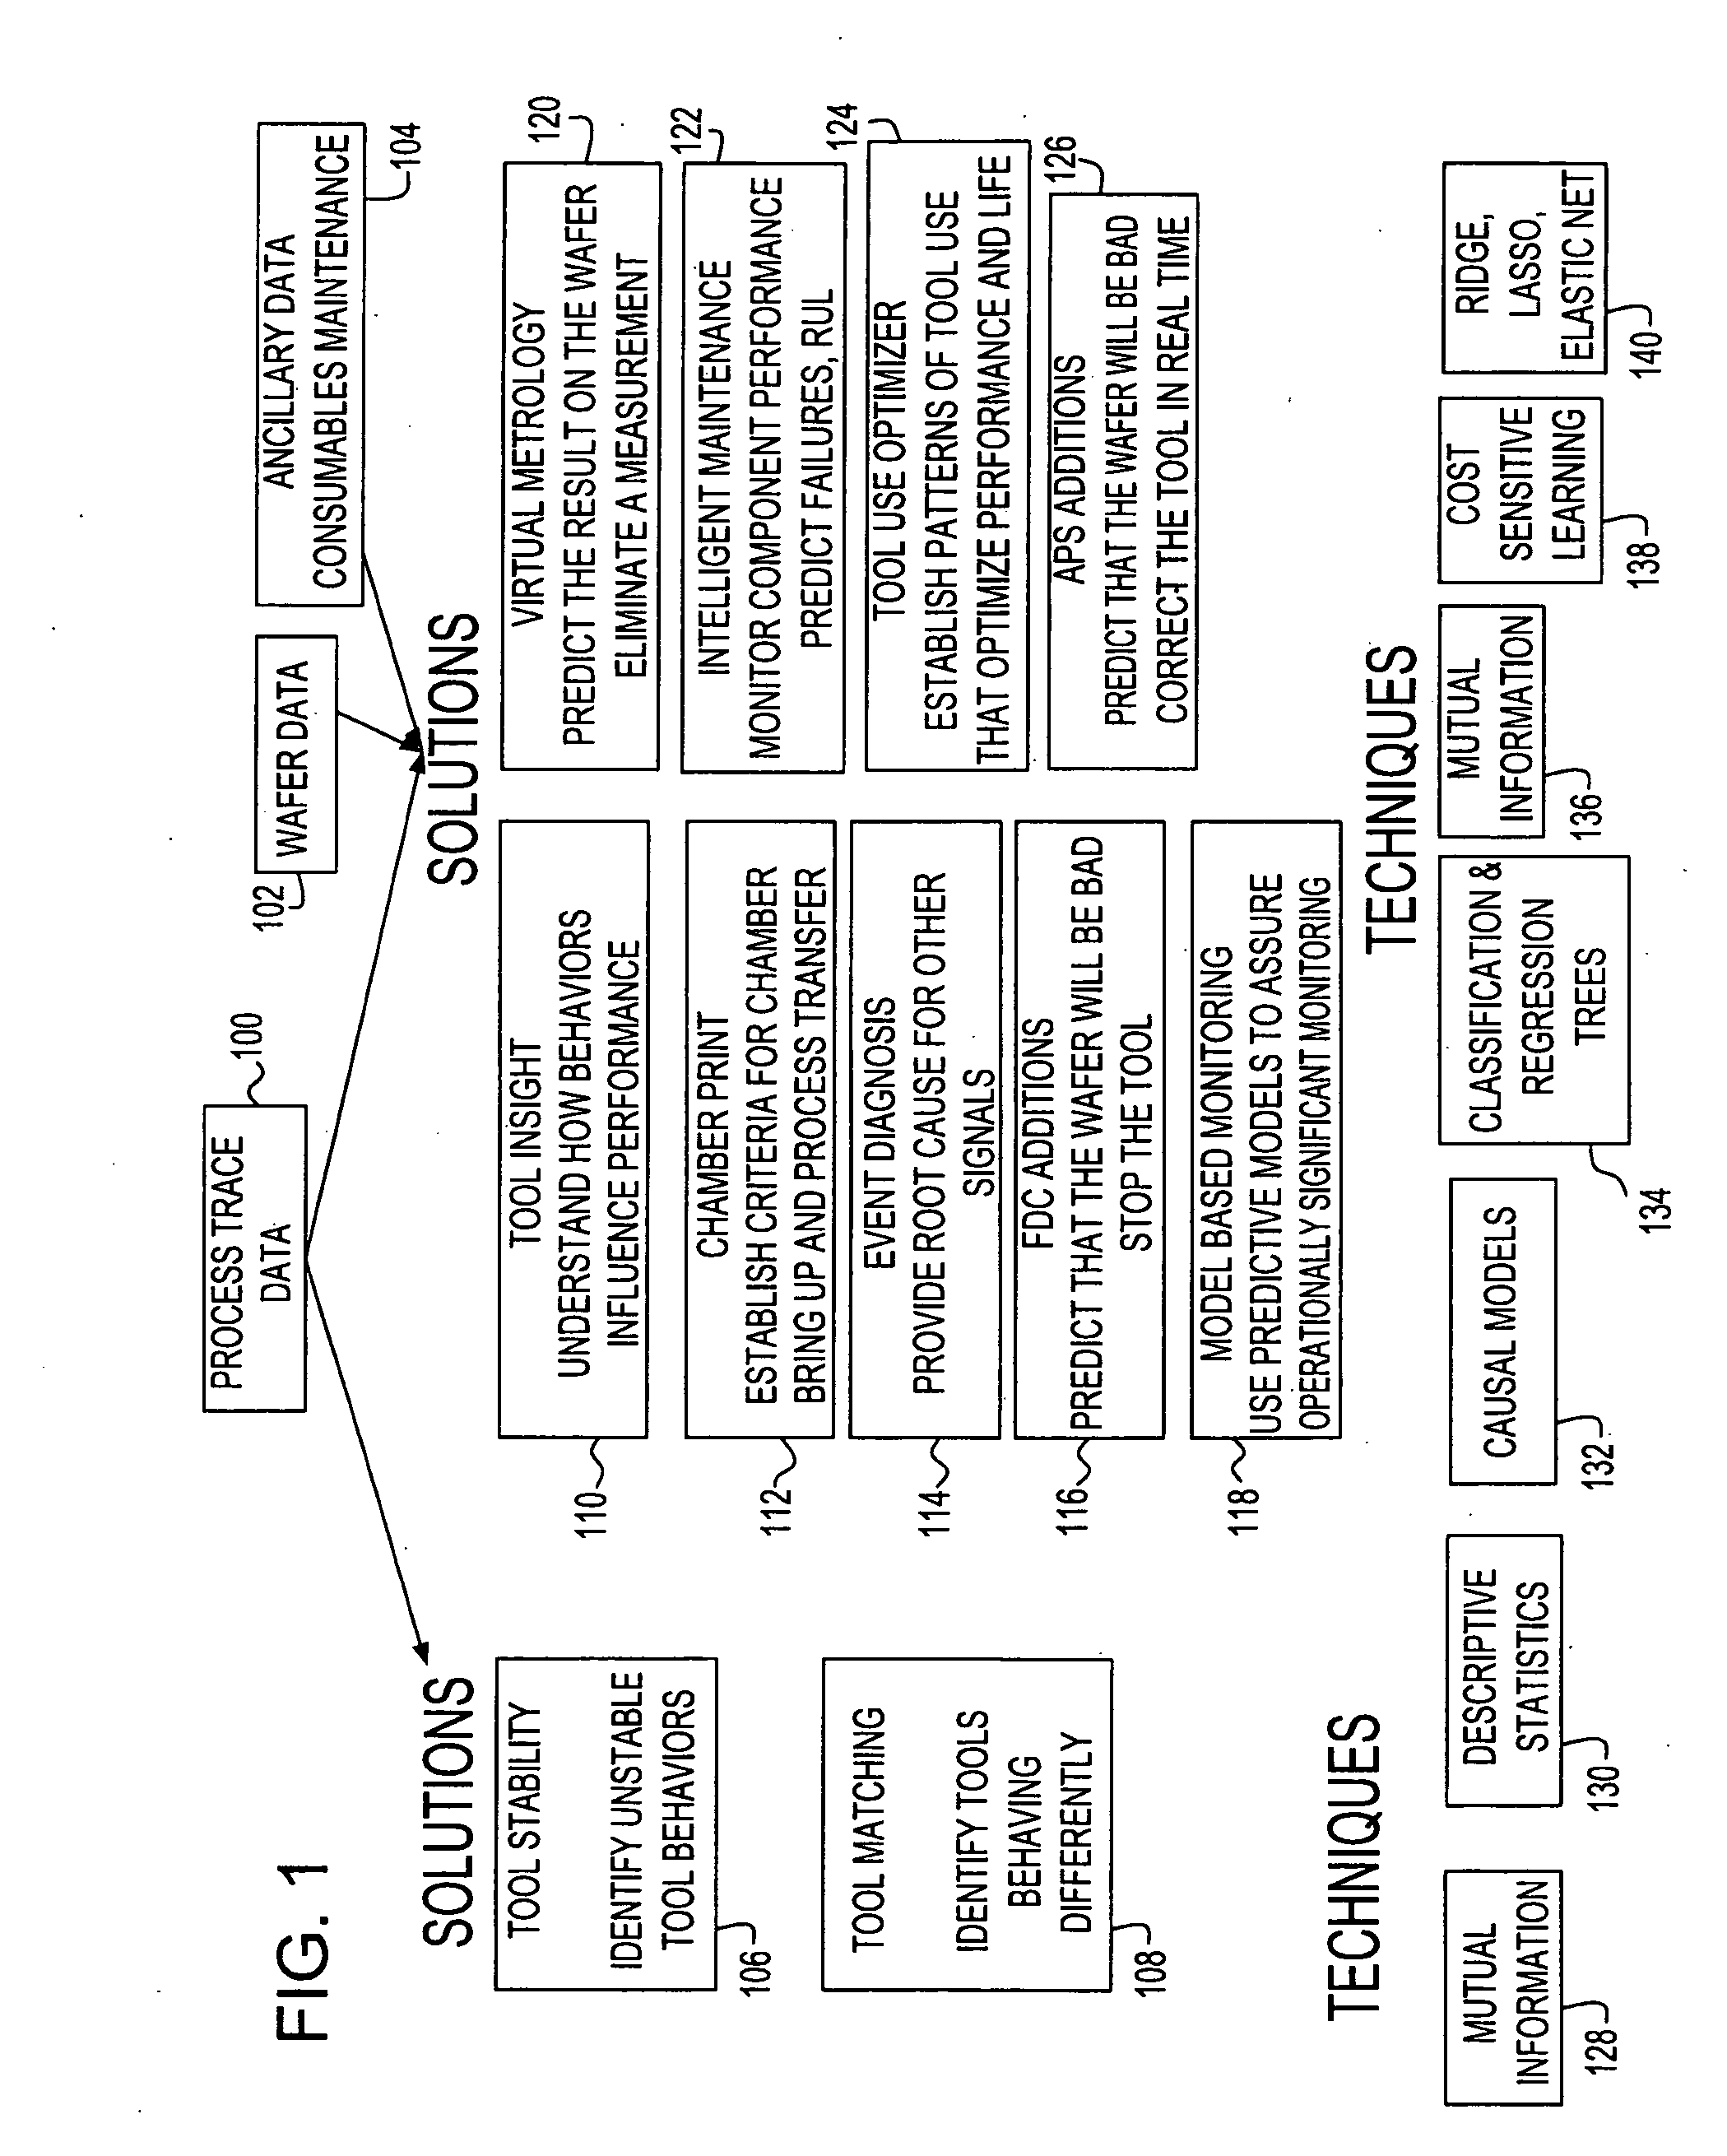 Method and system for evaluating a machine tool operating characteristics